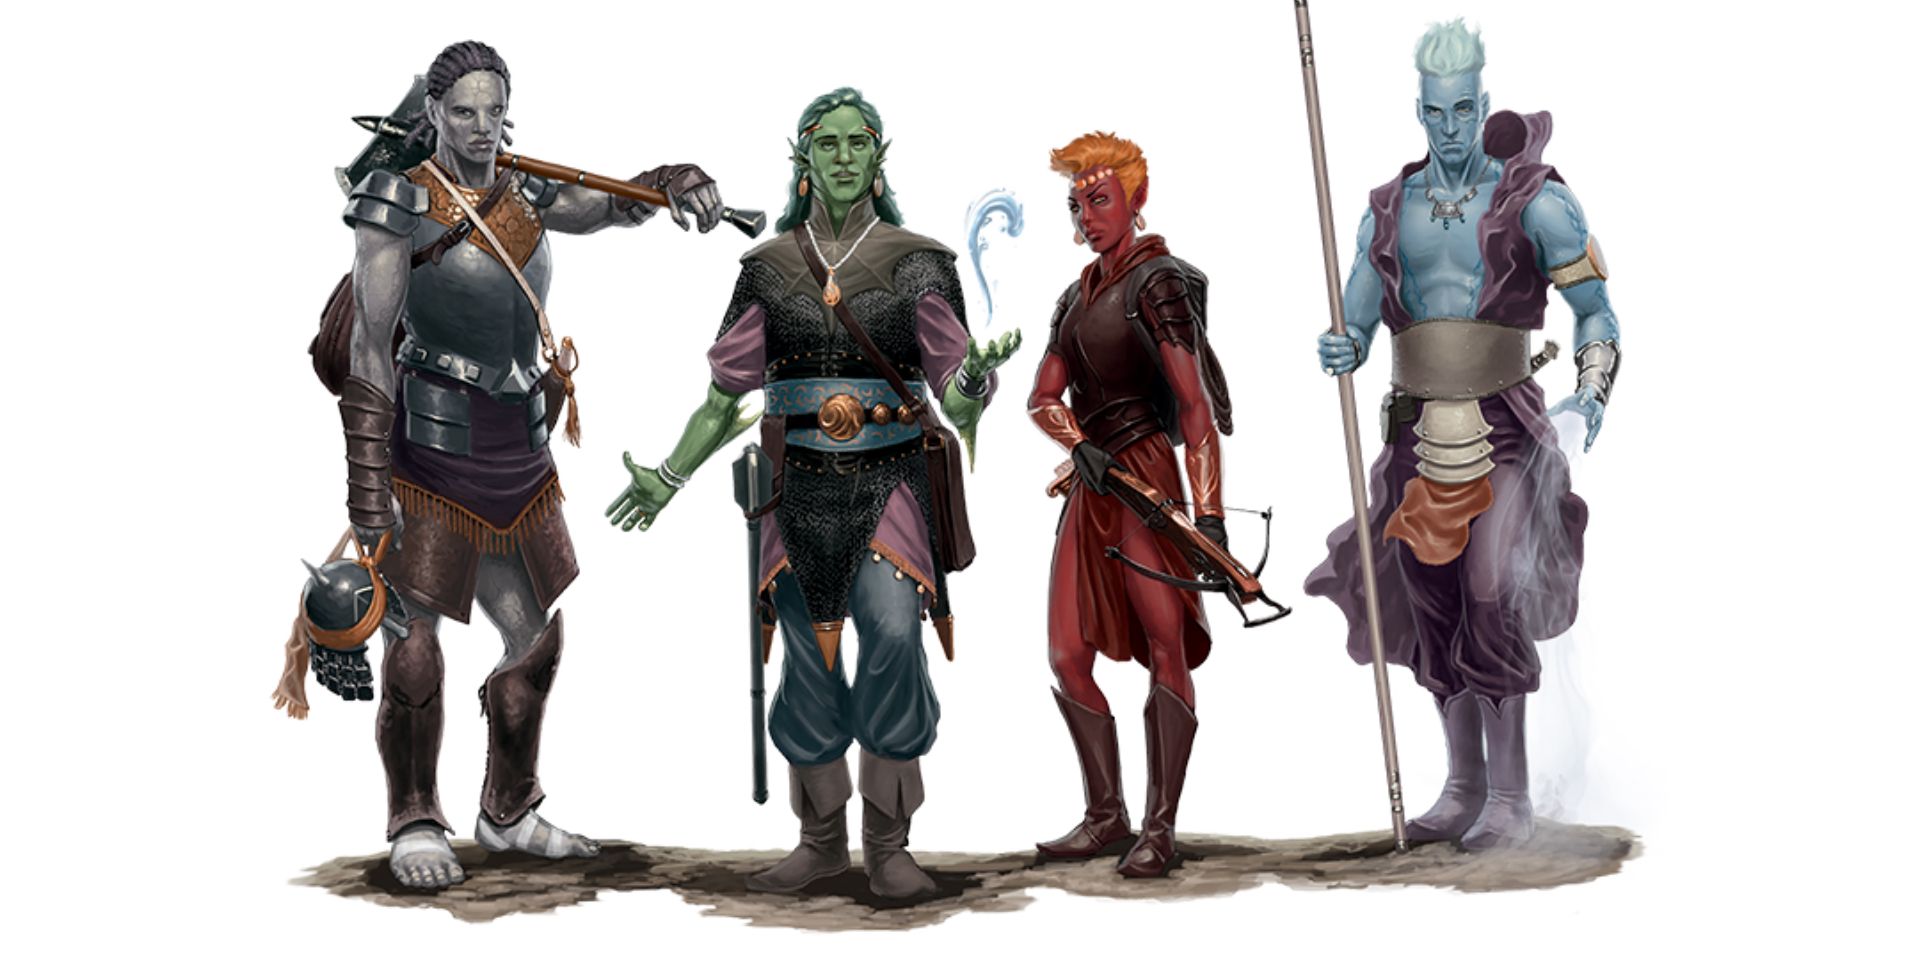 Four Dungeons & Dragons characters stood in front of a white background.